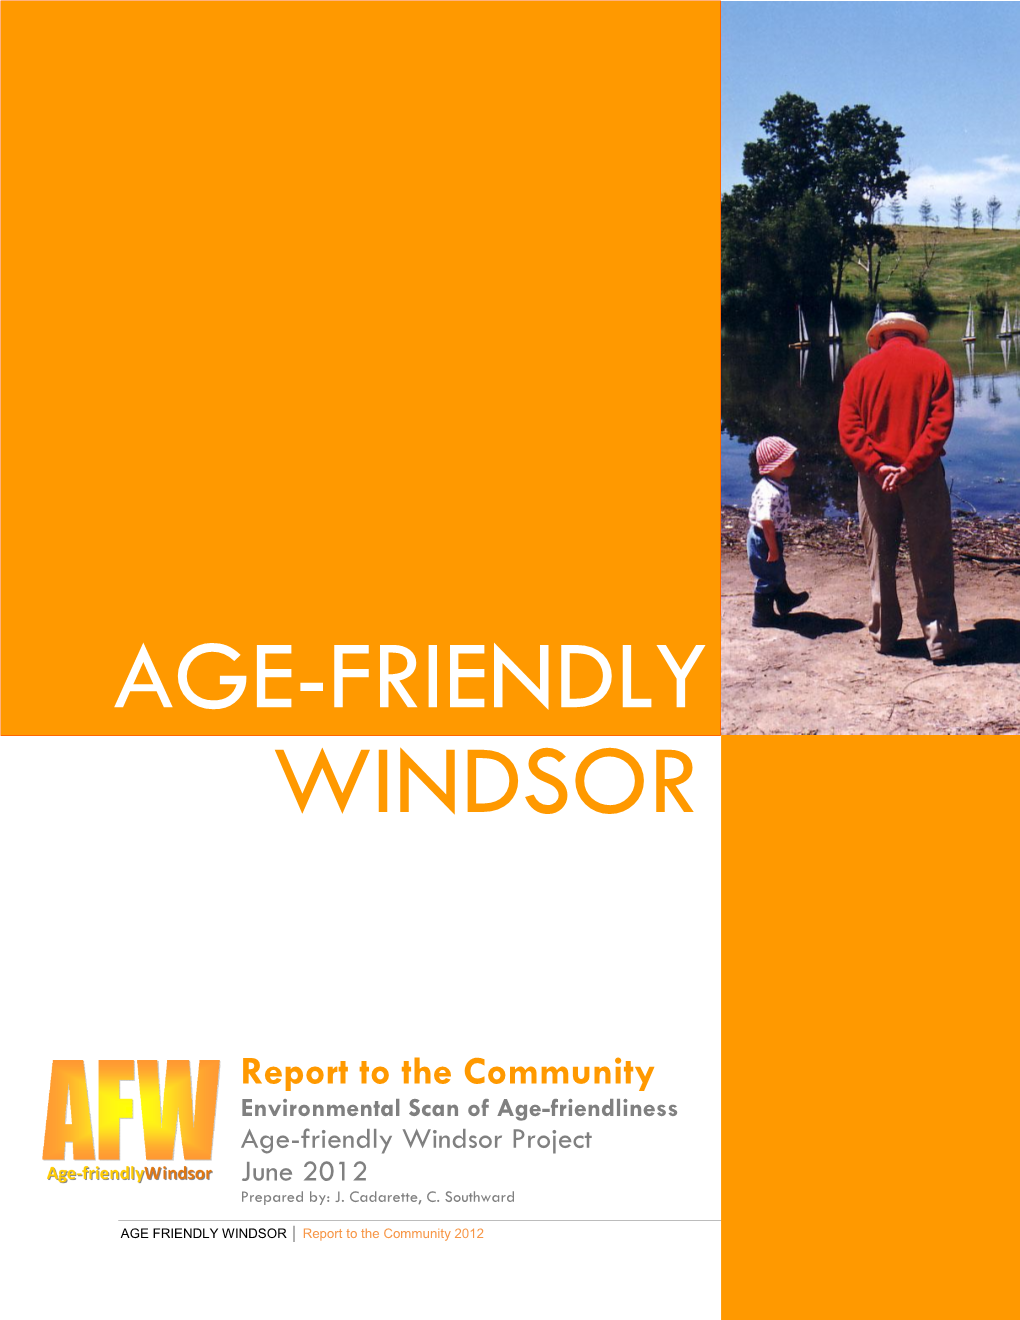 Age-Friendly Windsor Project June 2012 Prepared By: J